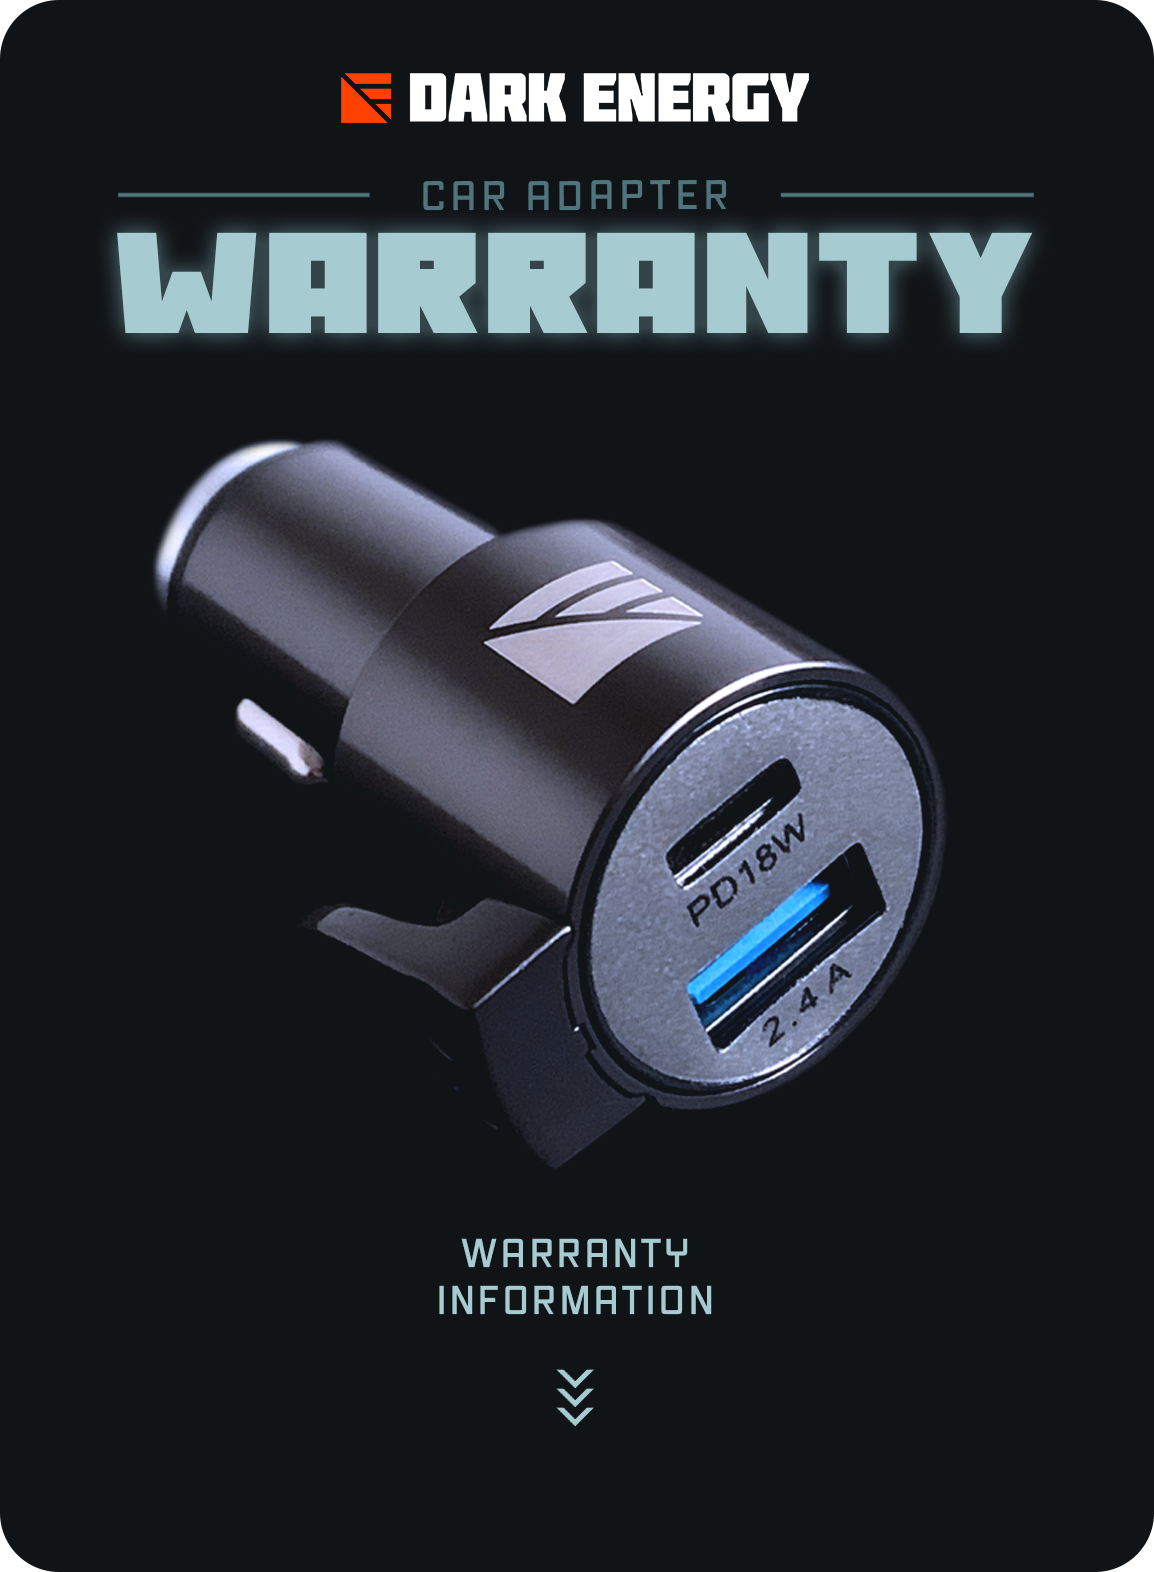 Warranty information for the Car Adapter.